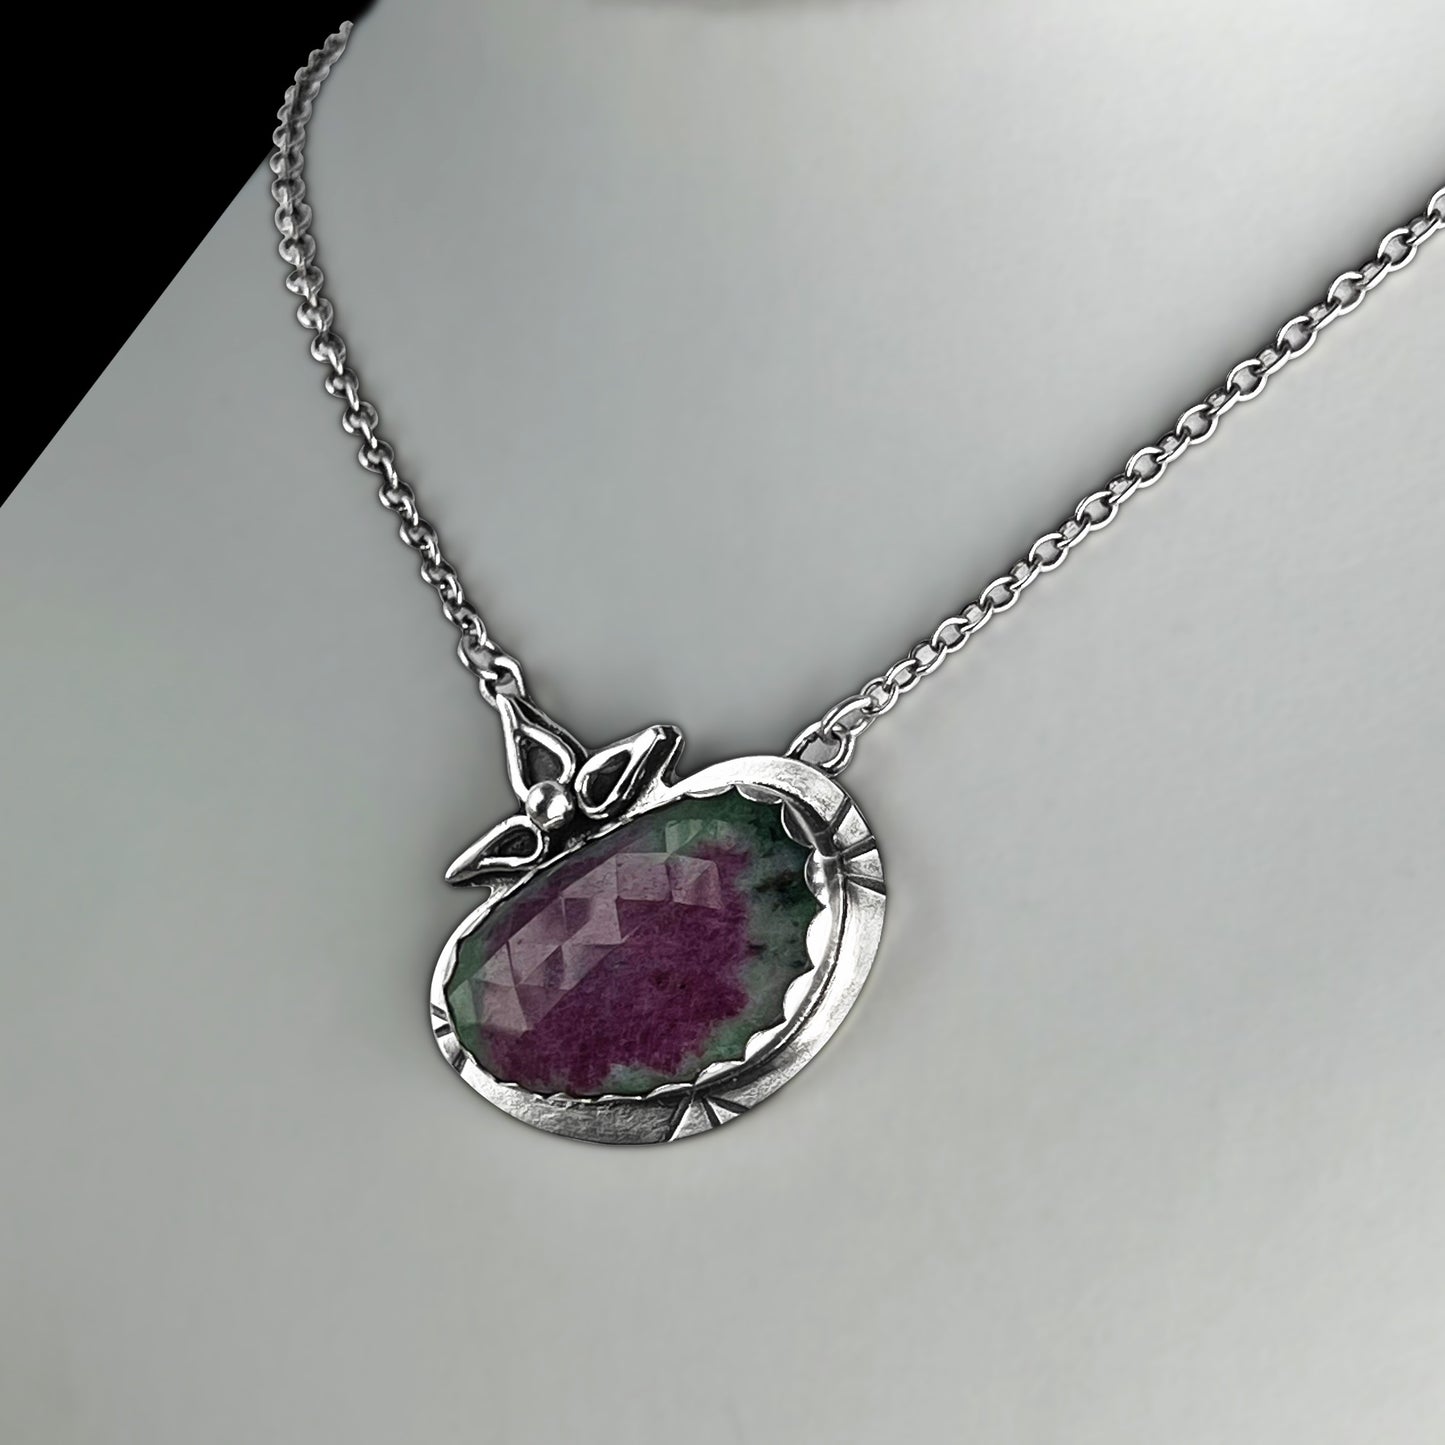 Gem - Ruby in Zoisite & Sterling Silver Necklace